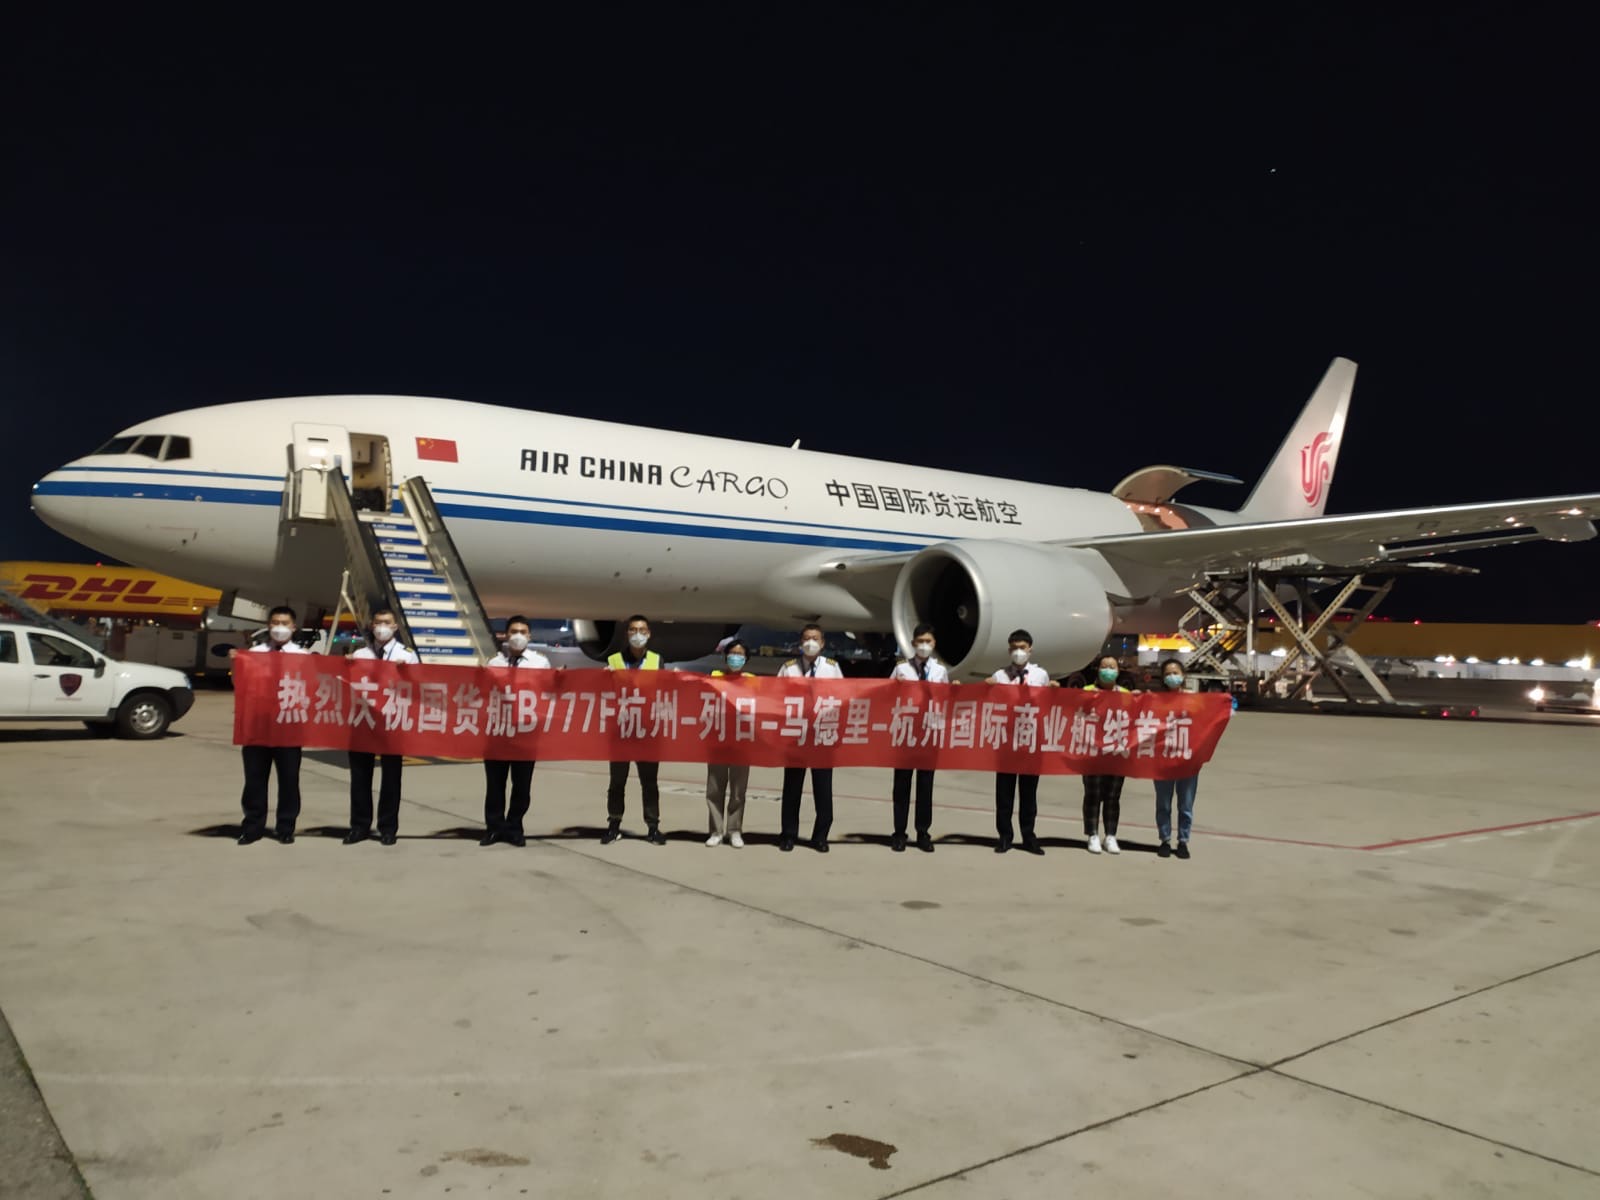 More Success for WFS in Madrid with AirBridgeCargo and Air China Cargo ...